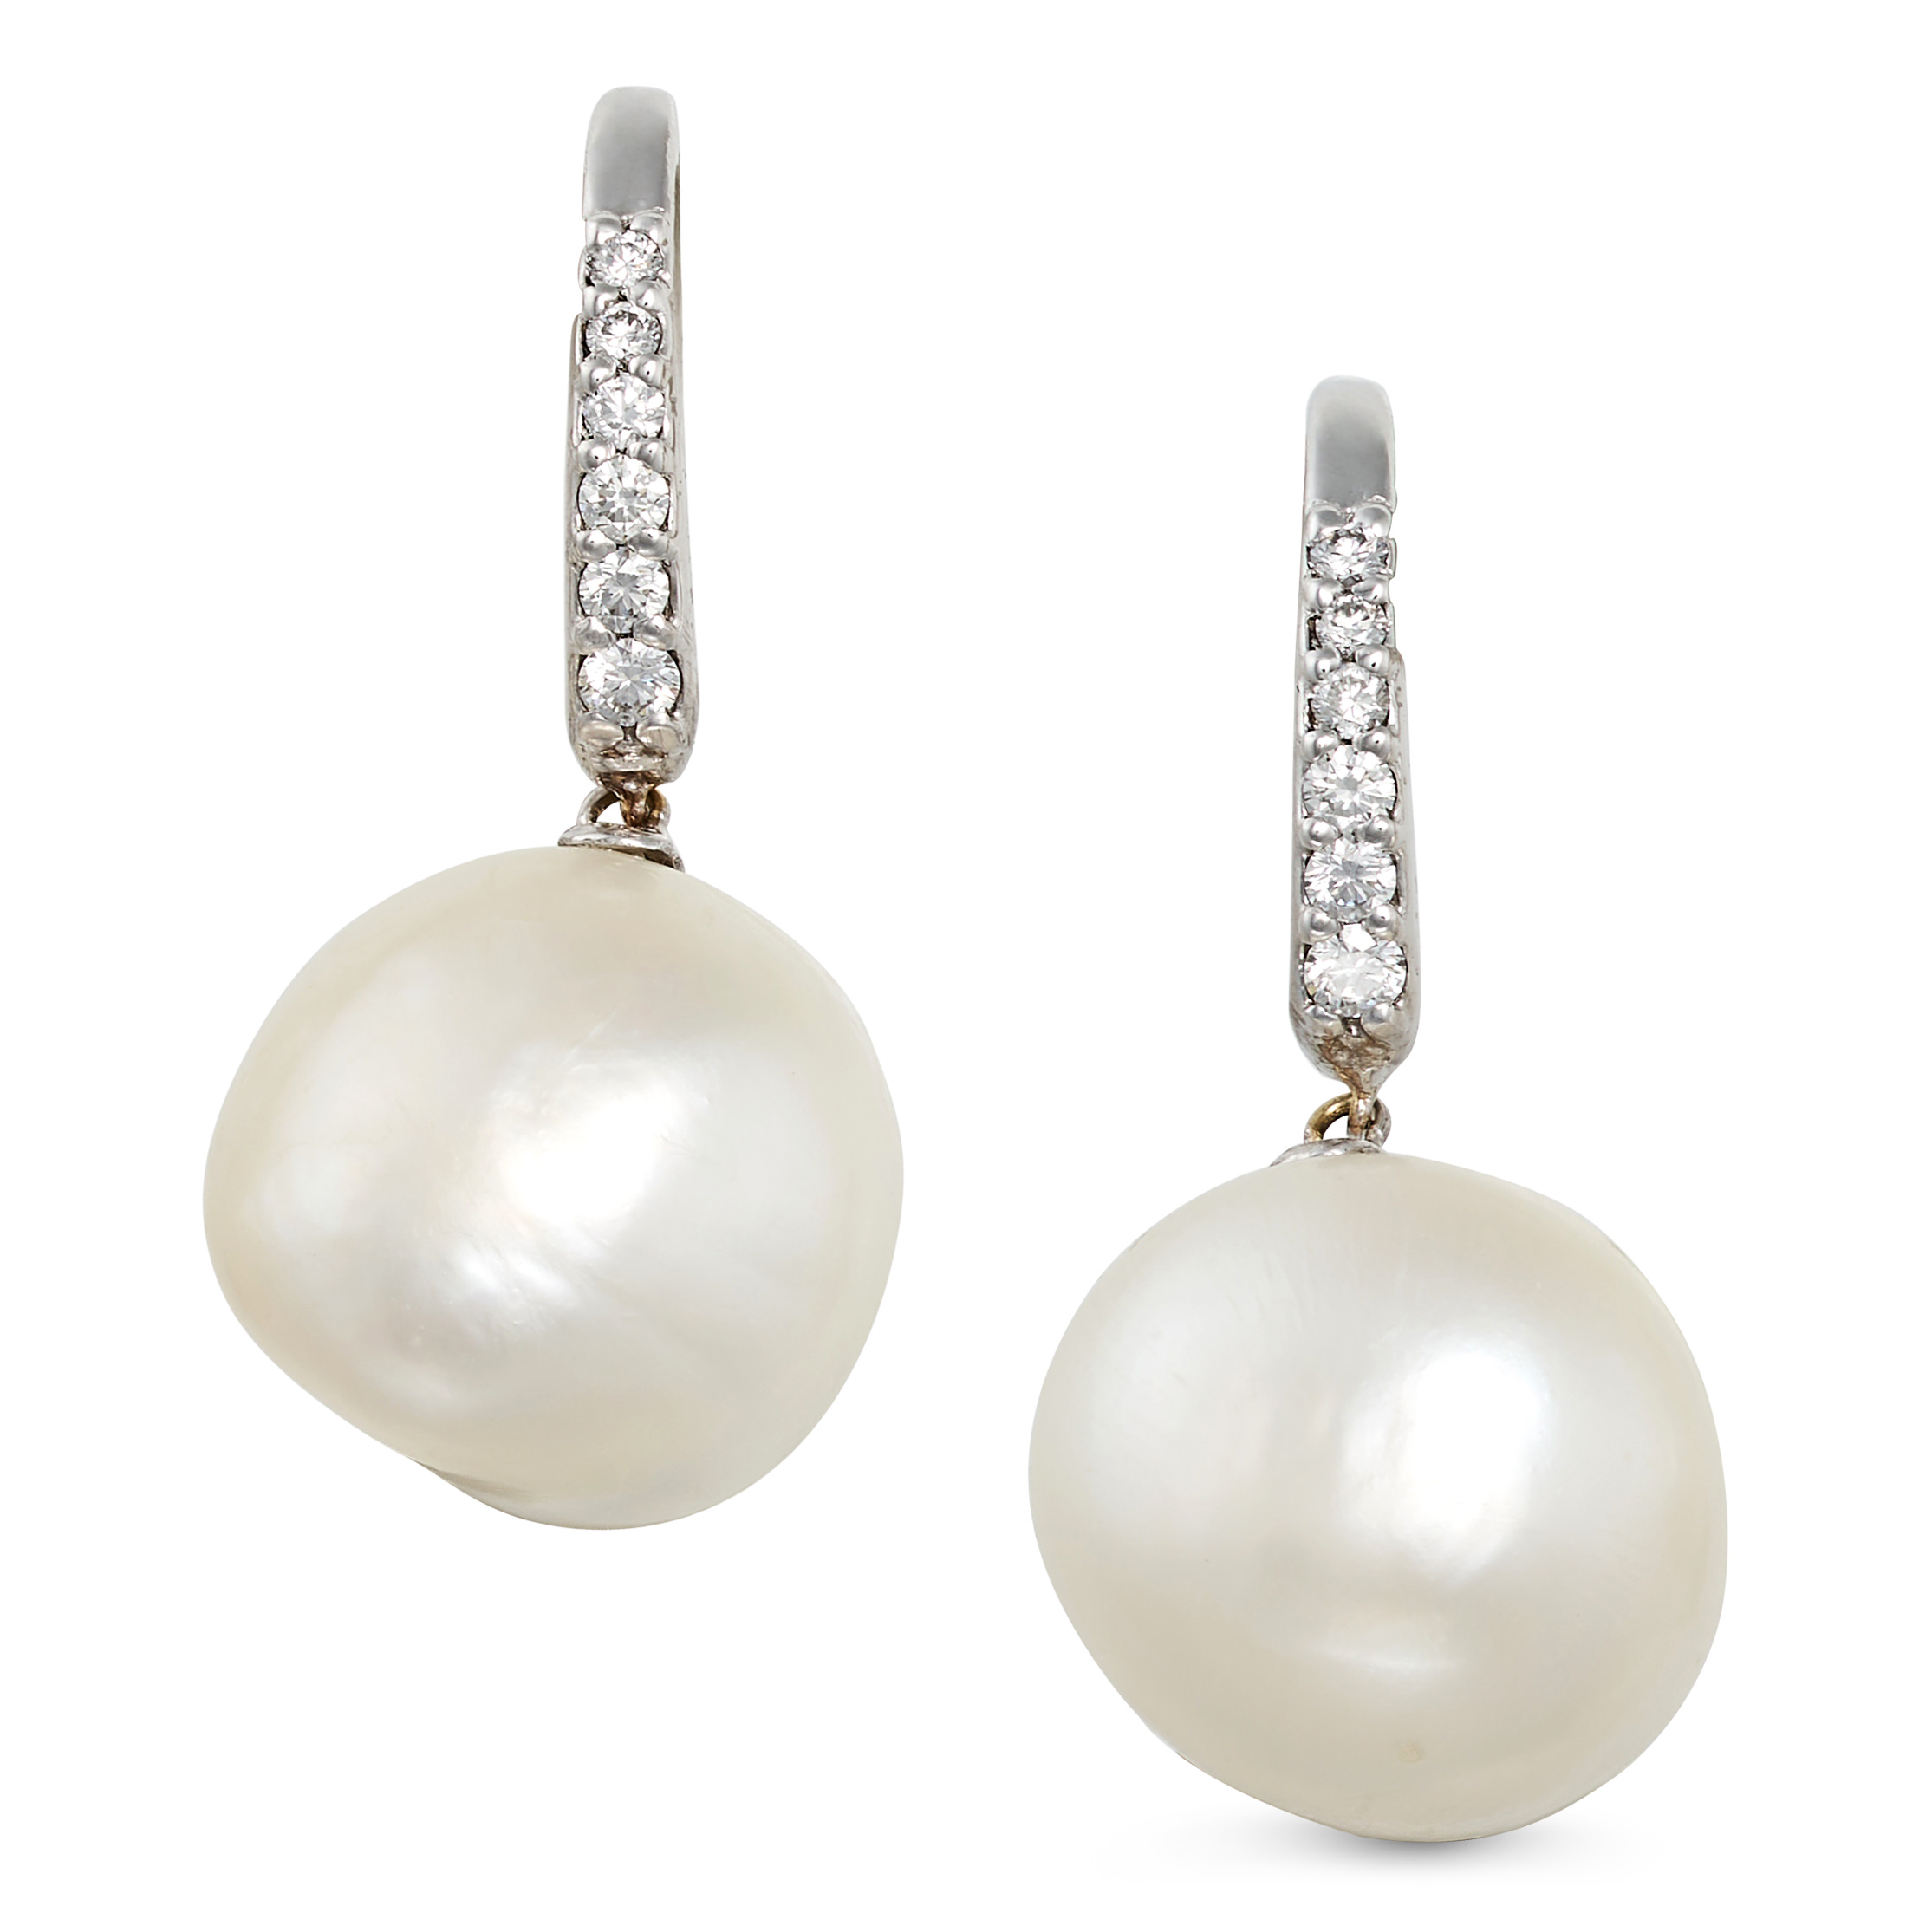 A PAIR OF PEARL AND DIAMOND DROP EARRINGS in 18ct white gold, each set with a row of round brilli...